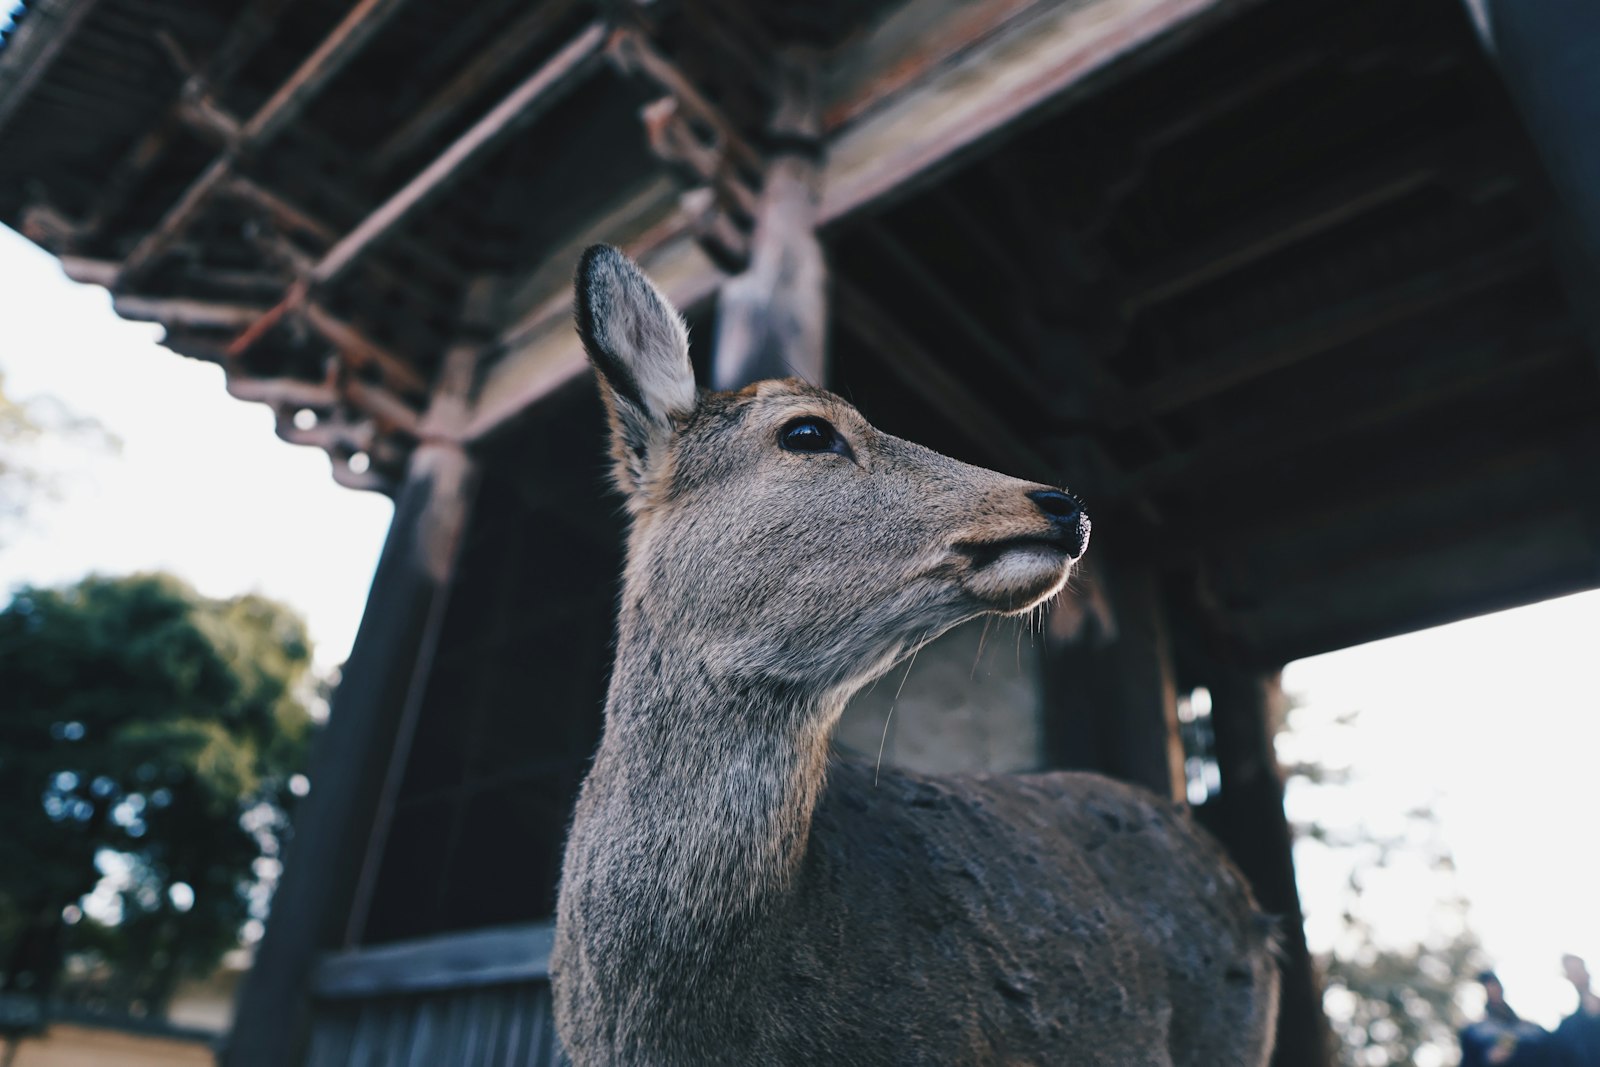 Sony a6000 sample photo. Deer standing in building photography